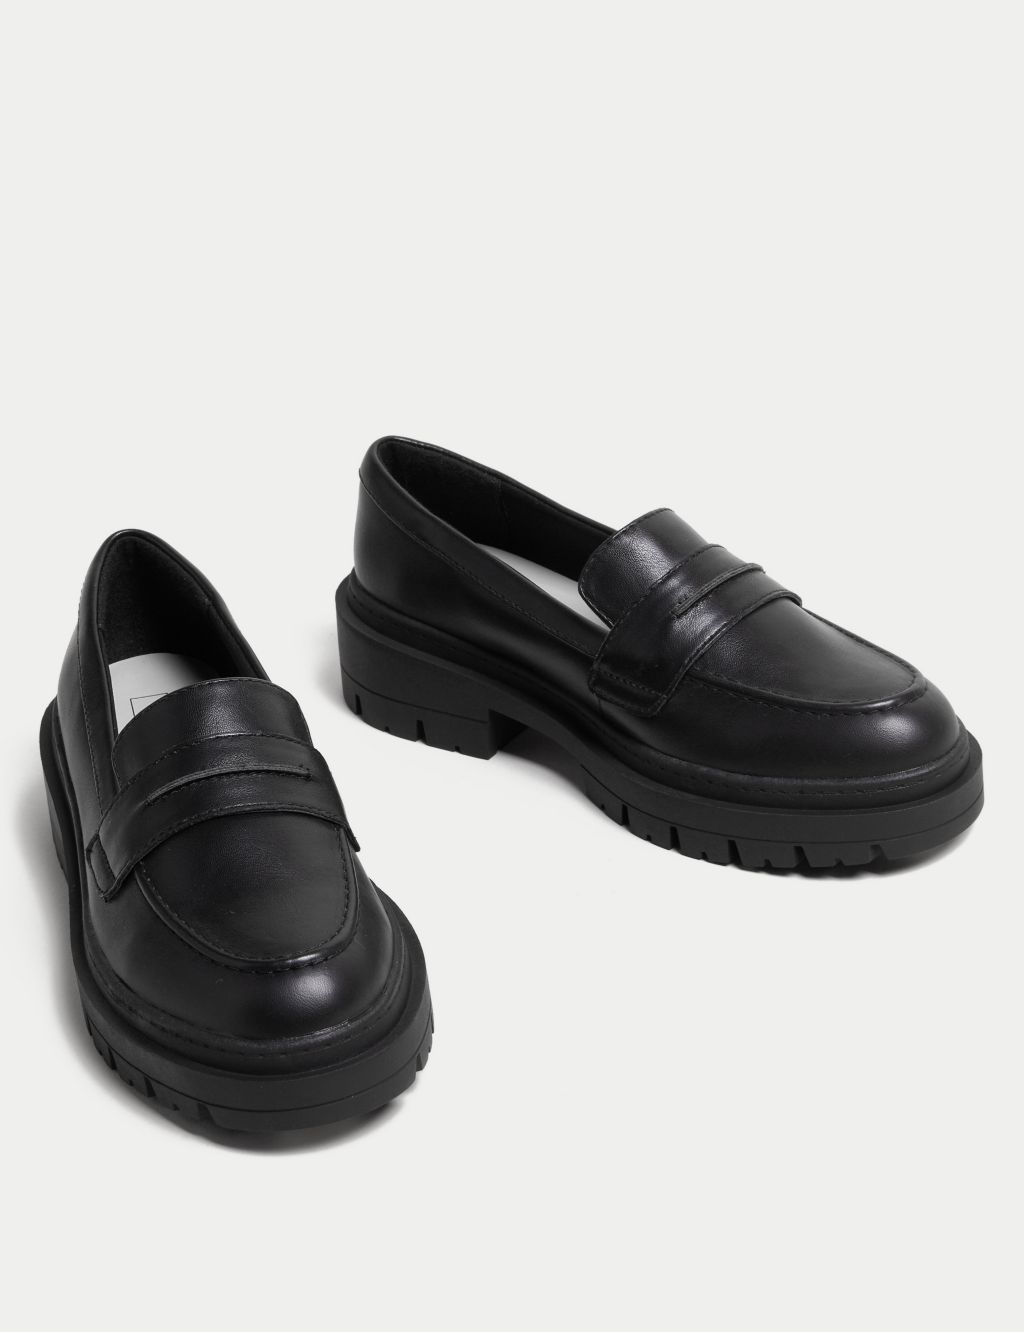 Wide Fit Slip On Flatform Loafers | M&S Collection | M&S